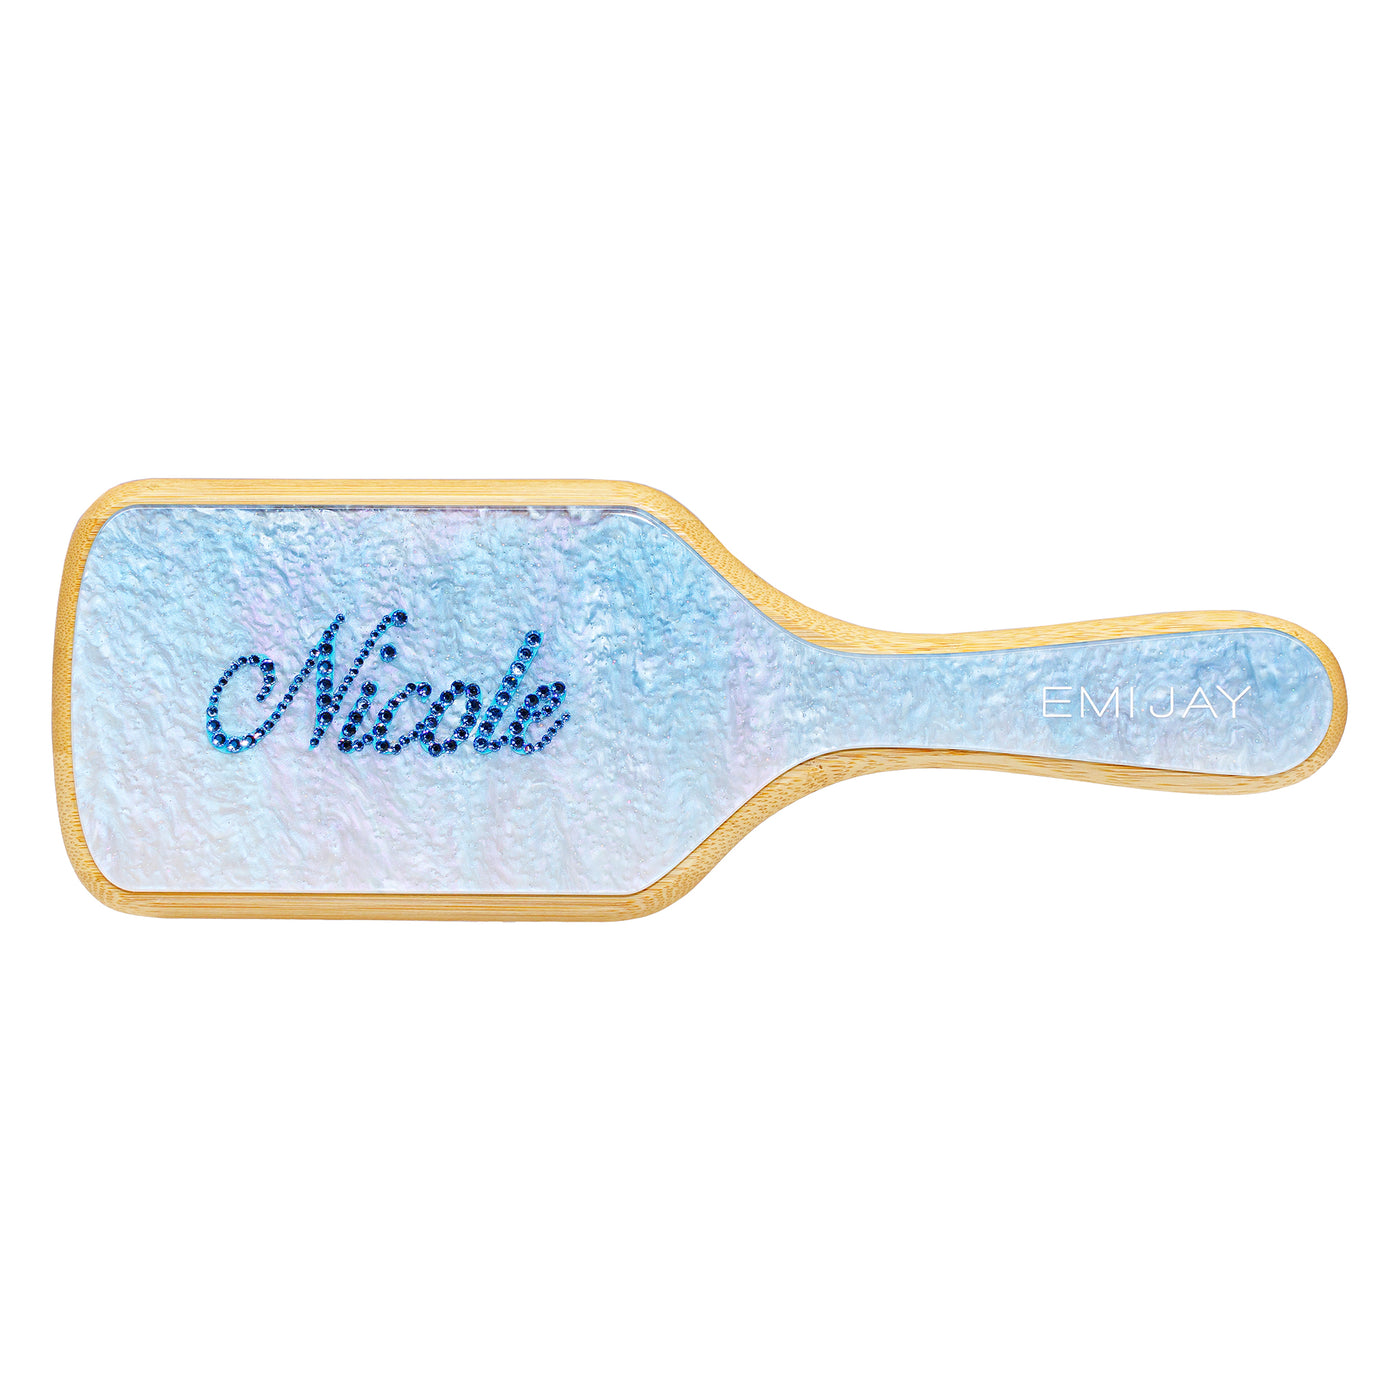 Custom Paddle Brush in Blue Sugar with Baby Blue Stones